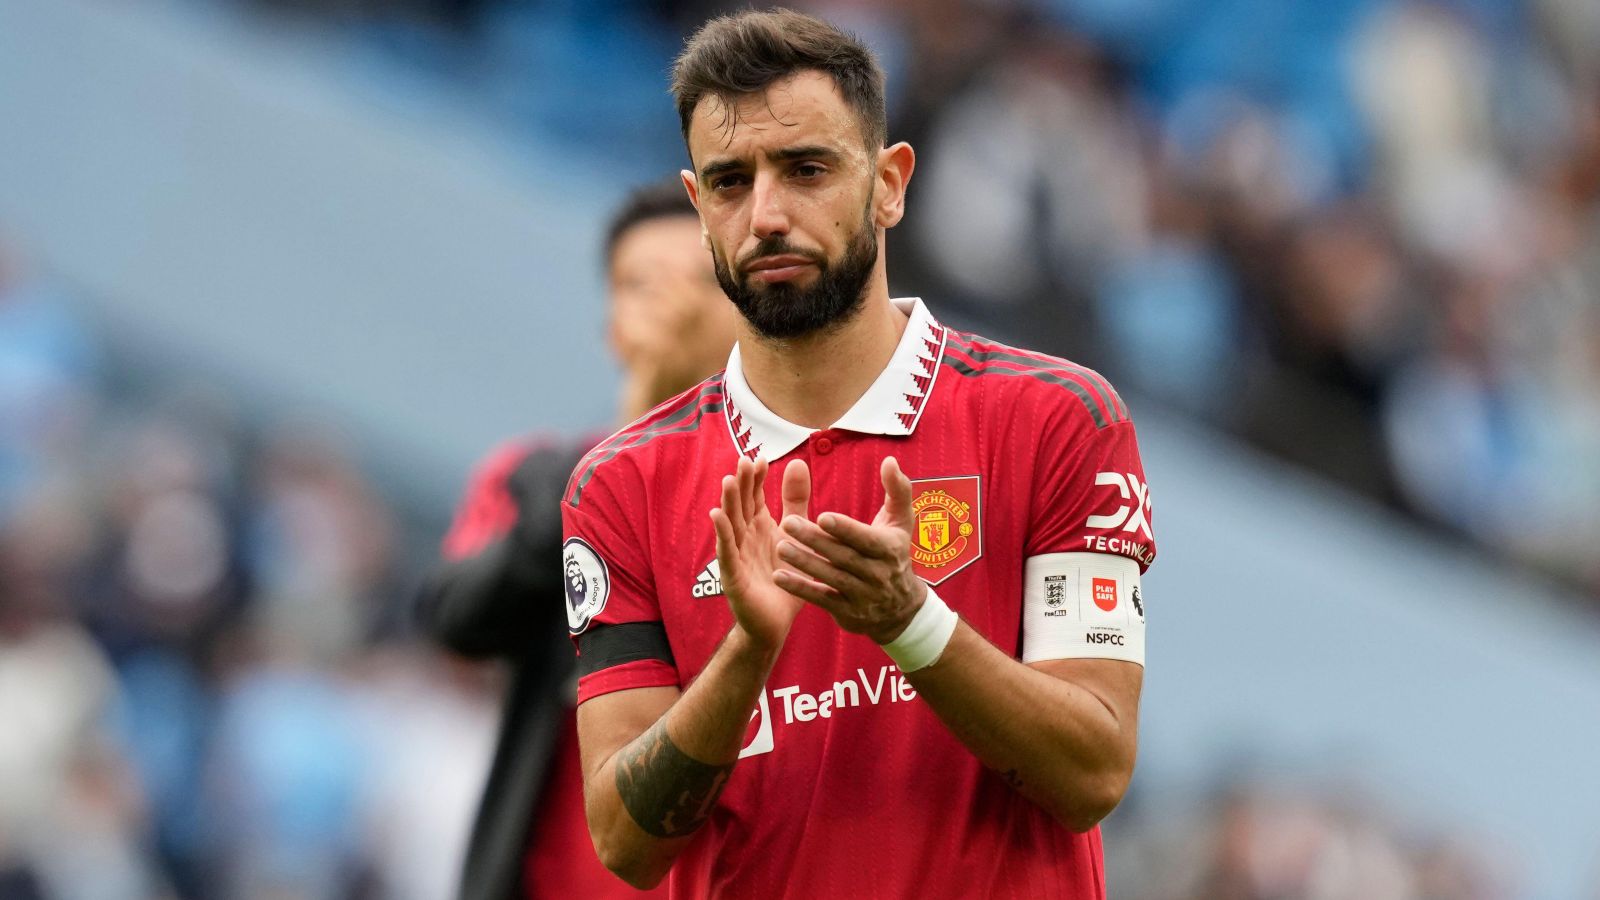 Erik ten Hag says he has to decide how best to replace Bruno Fernandes for Manchester United's trip to Aston Villa - Bóng Đá